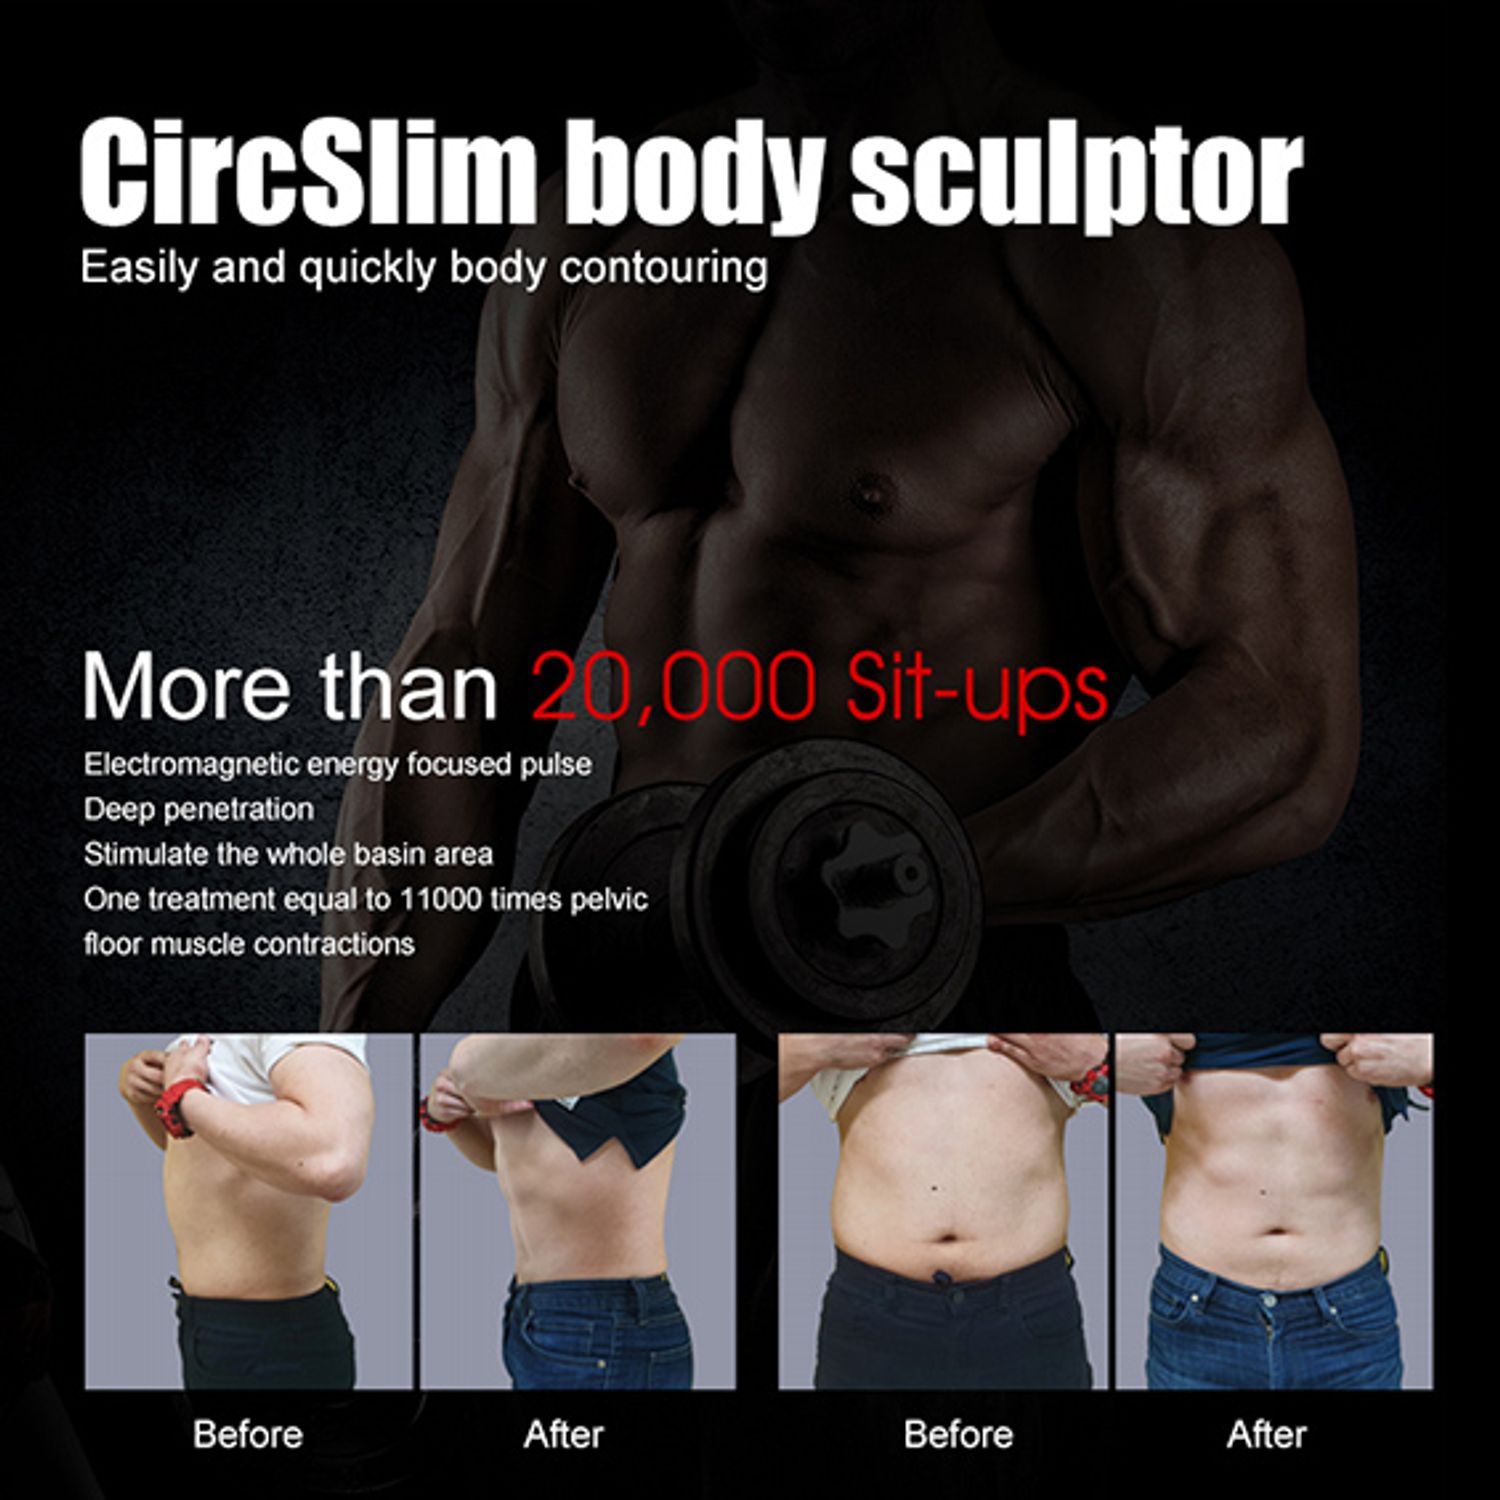 CircSlim body sculptor' ad with before and after torso shots